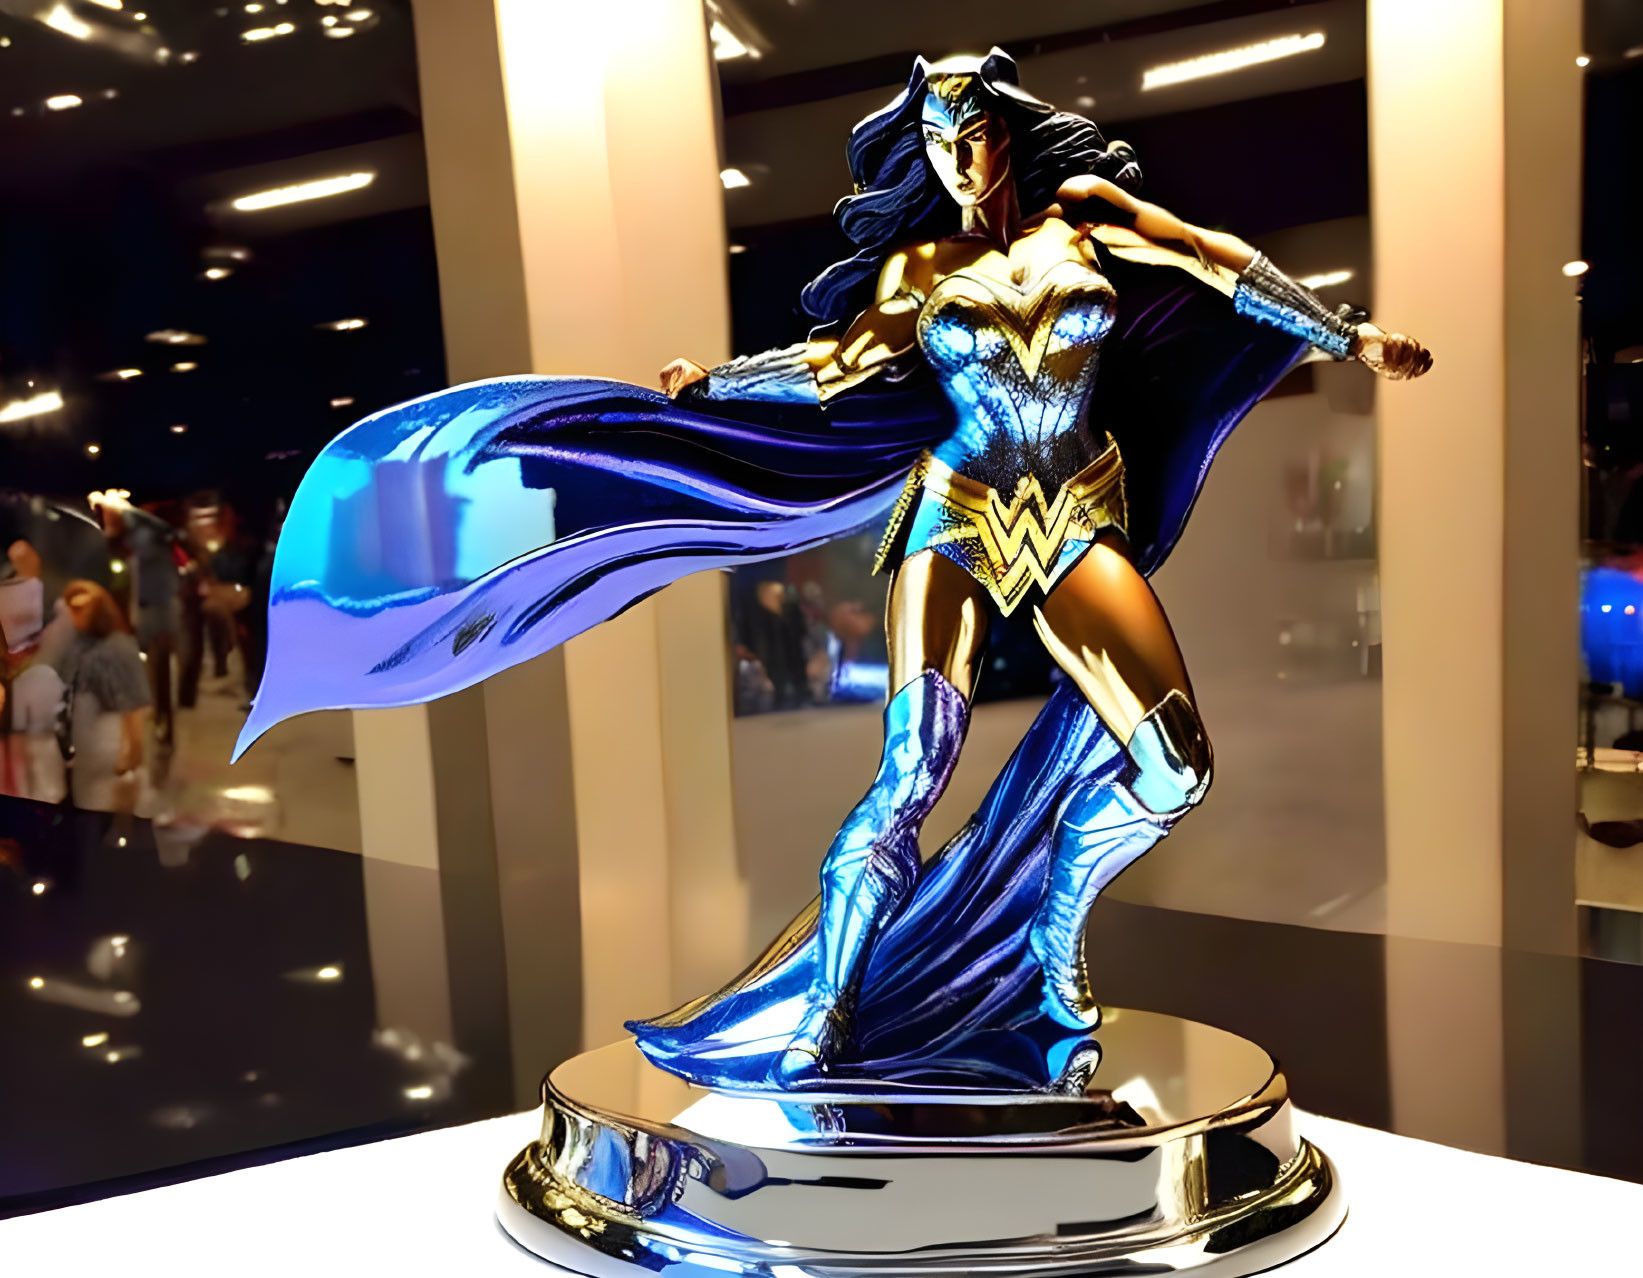 Shiny Wonder Woman Figurine with Flowing Cape Displayed at Convention